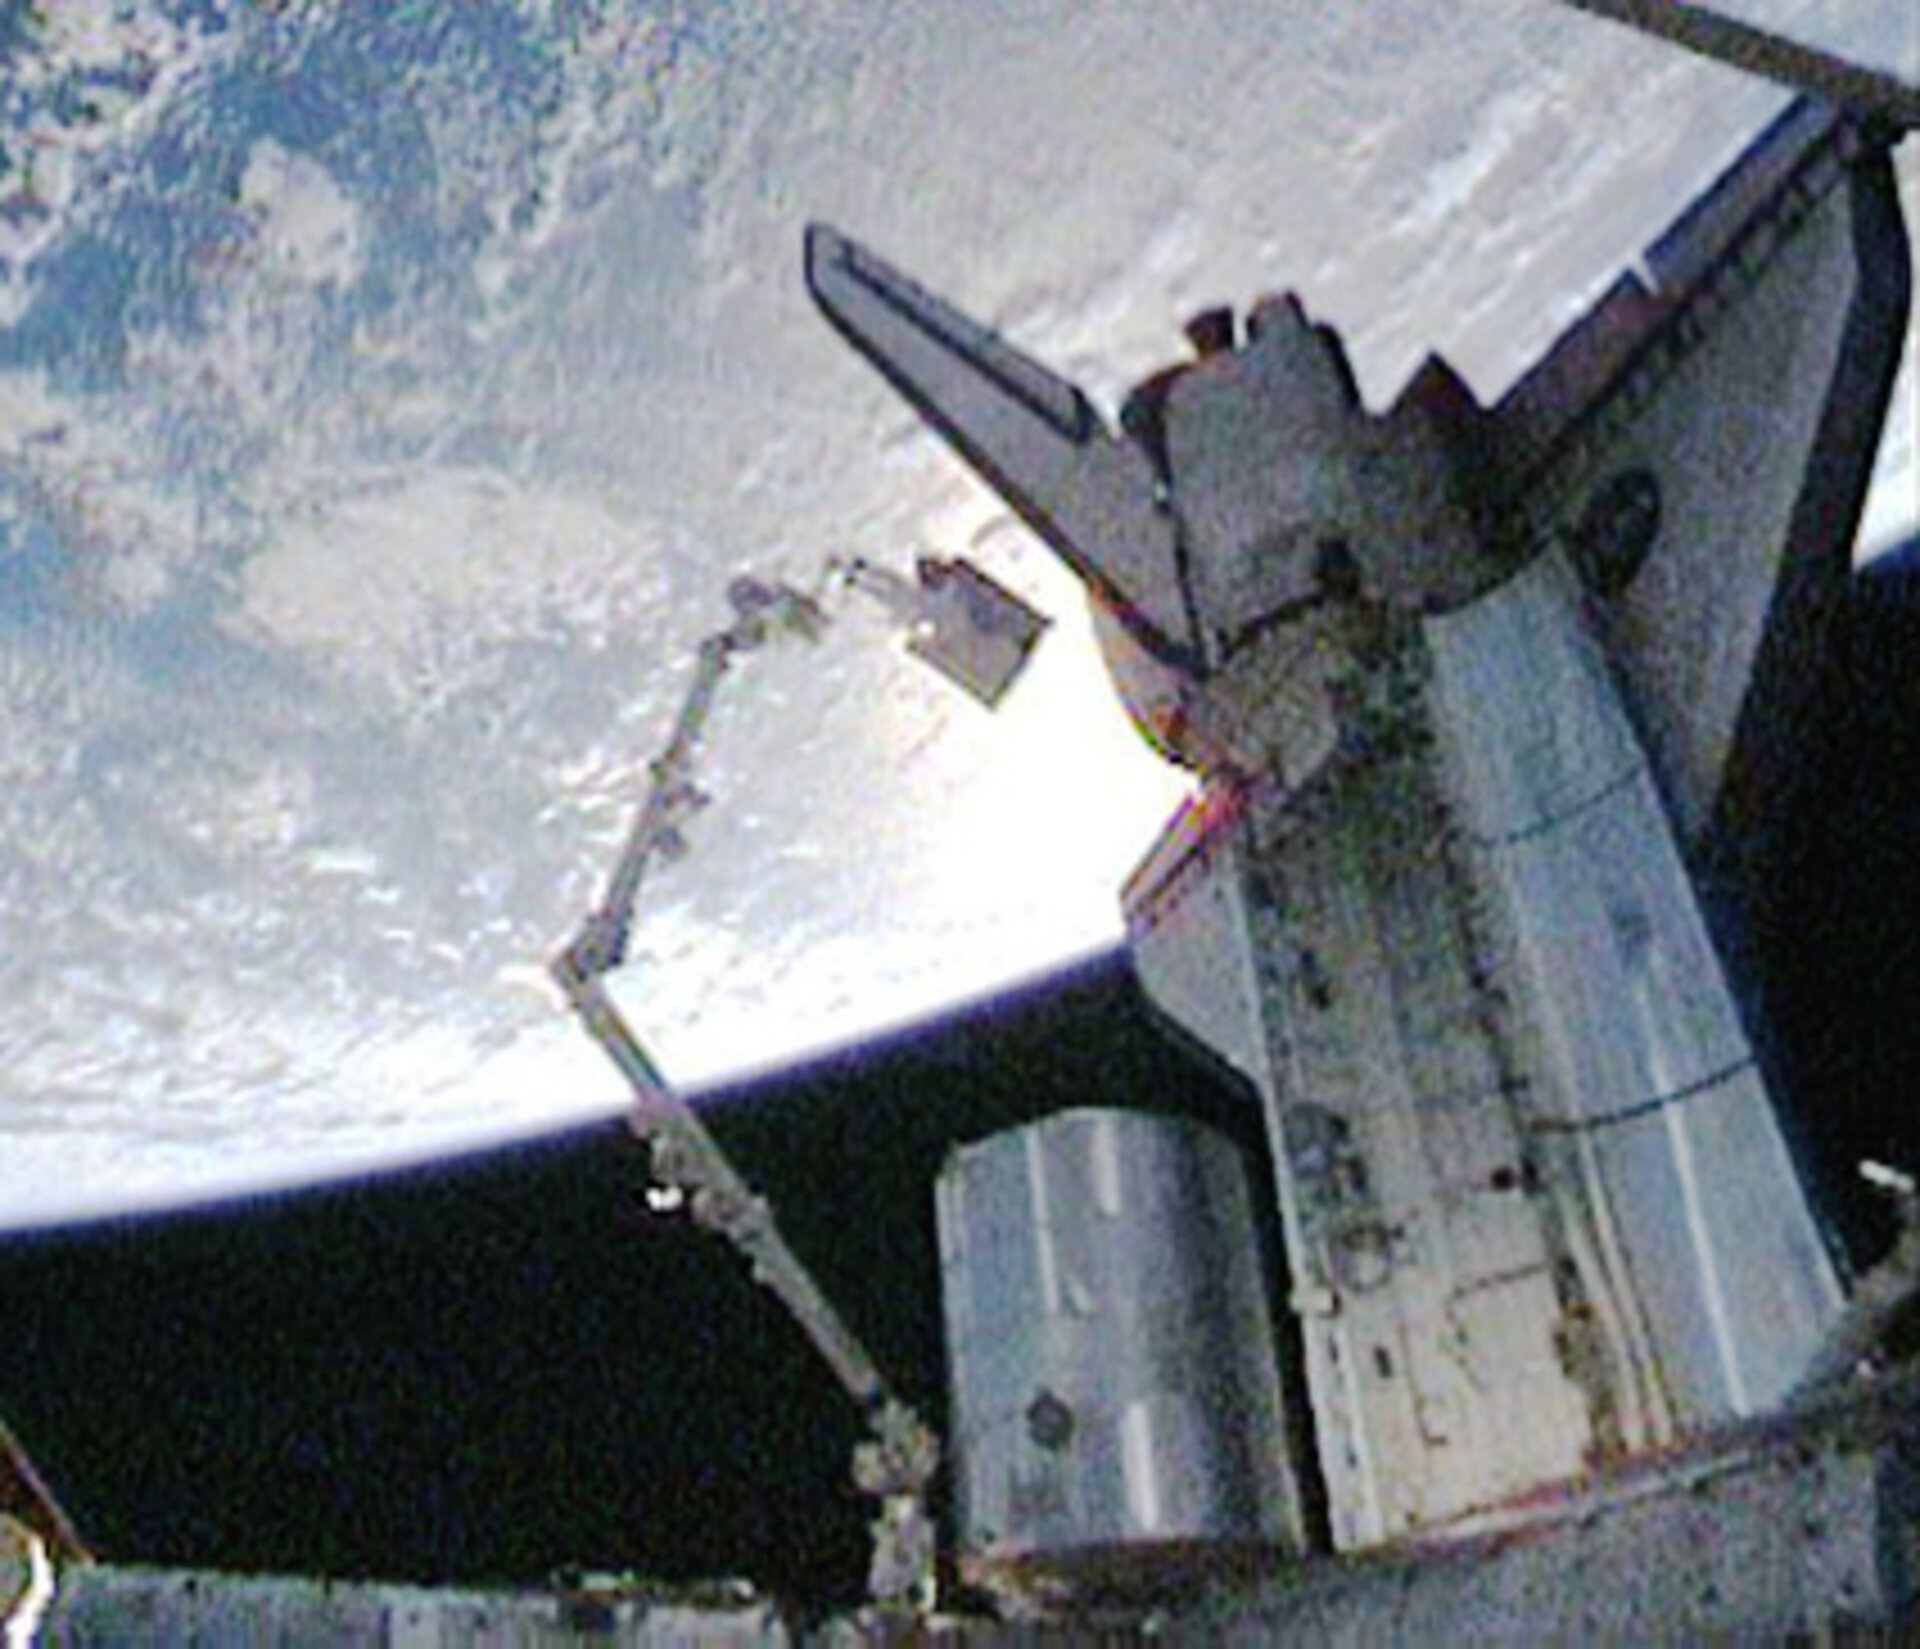 Christer Fuglesang rides the Shuttle robotic arm during the second STS-128 spacewalk